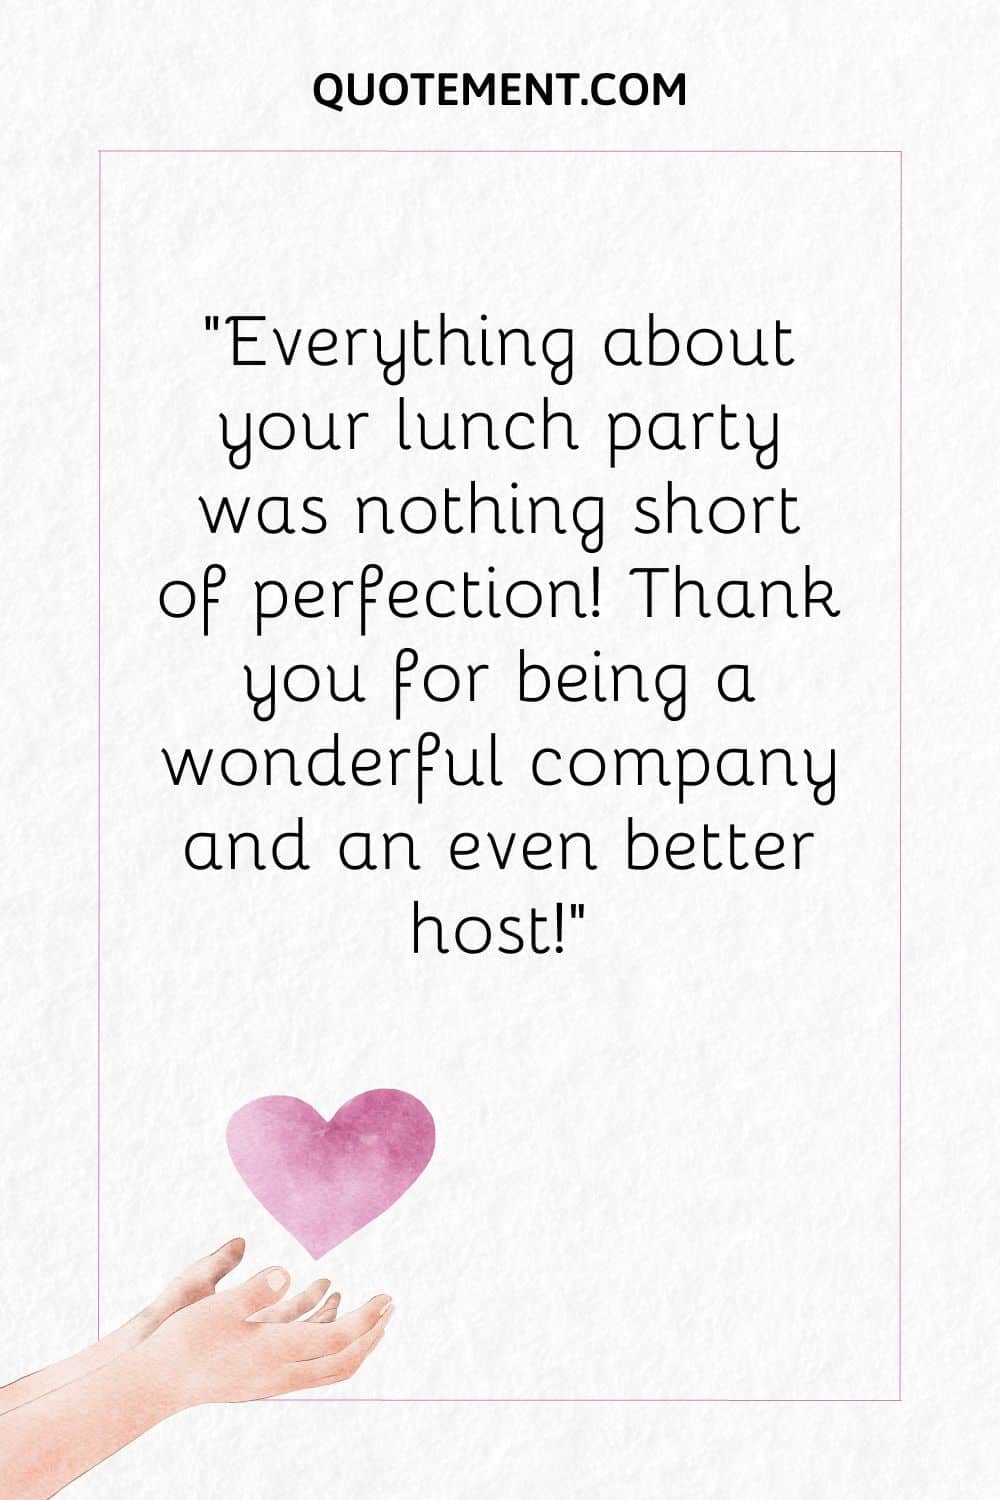 Everything about your lunch party was nothing short of perfection